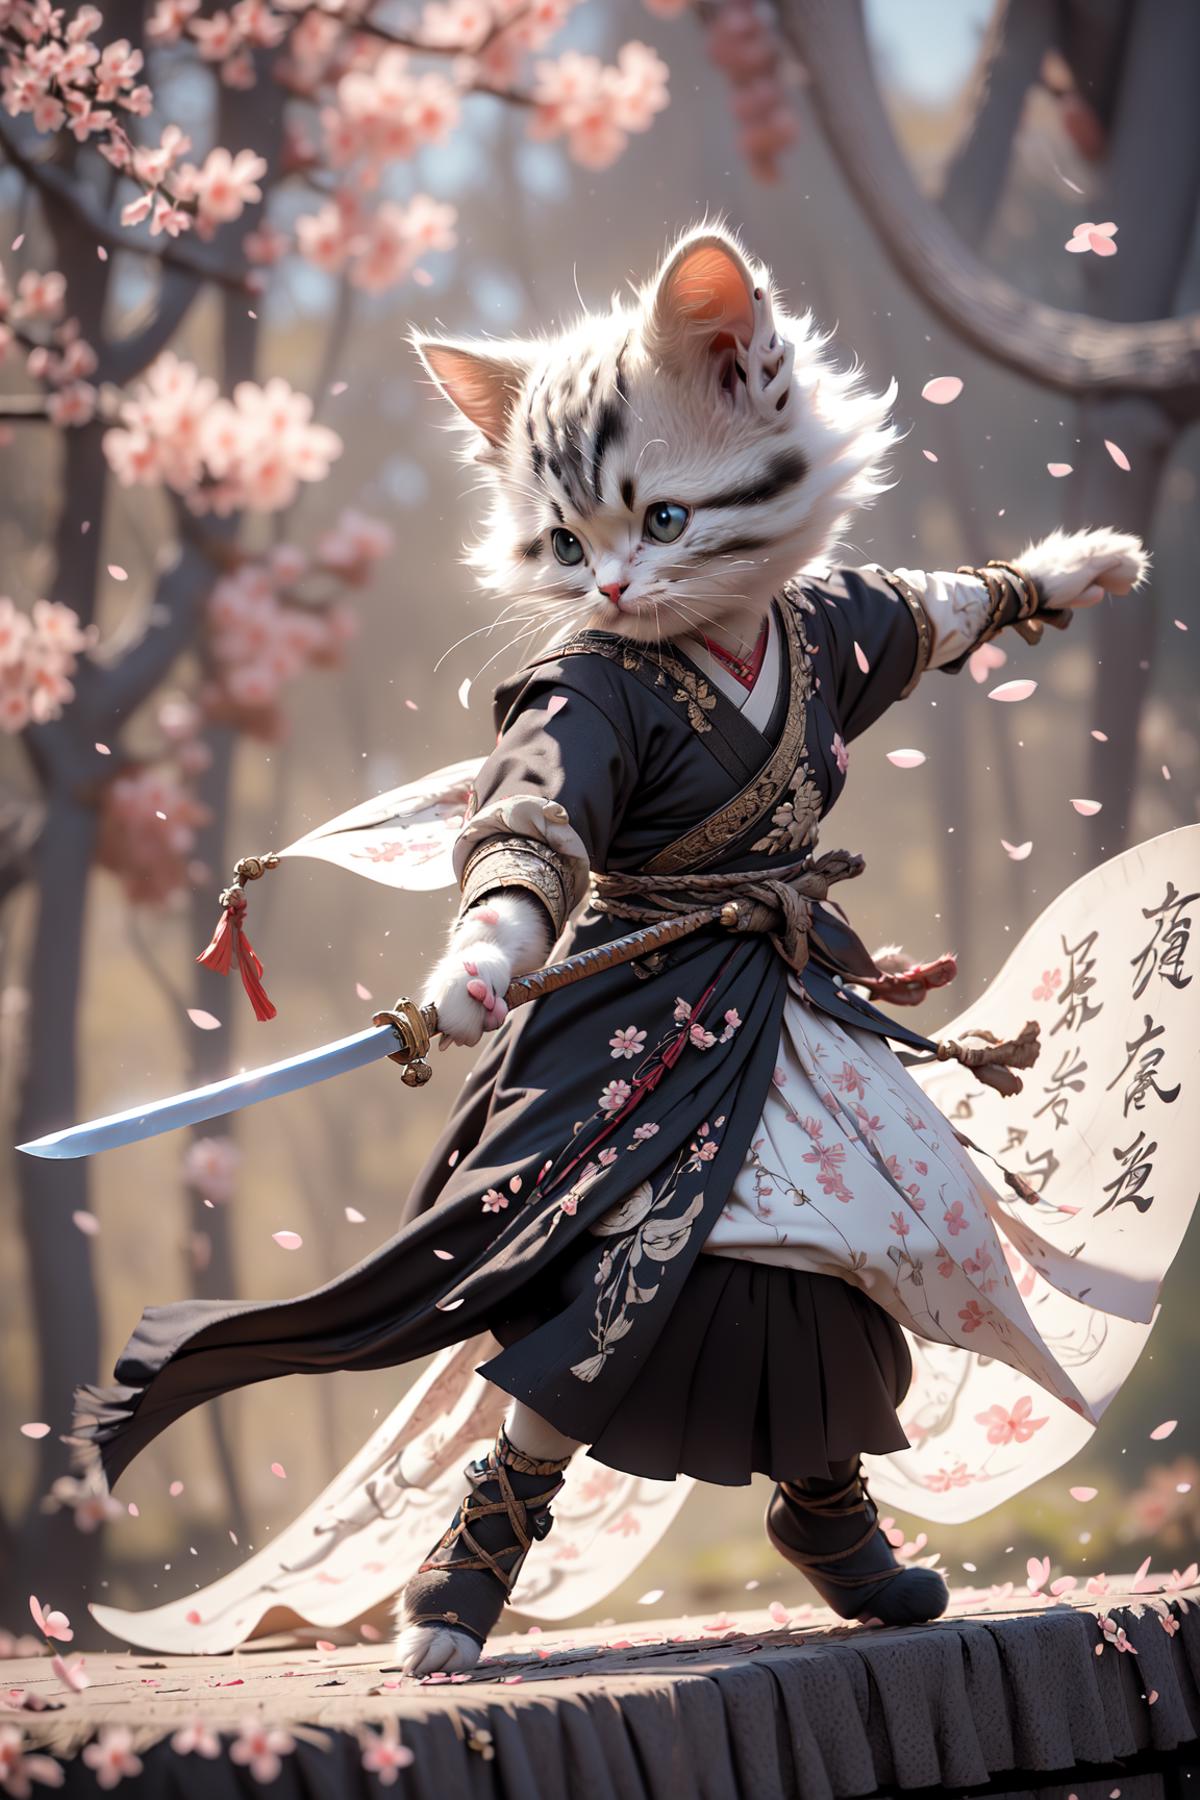 A cat dressed in a kimono and holding a sword.